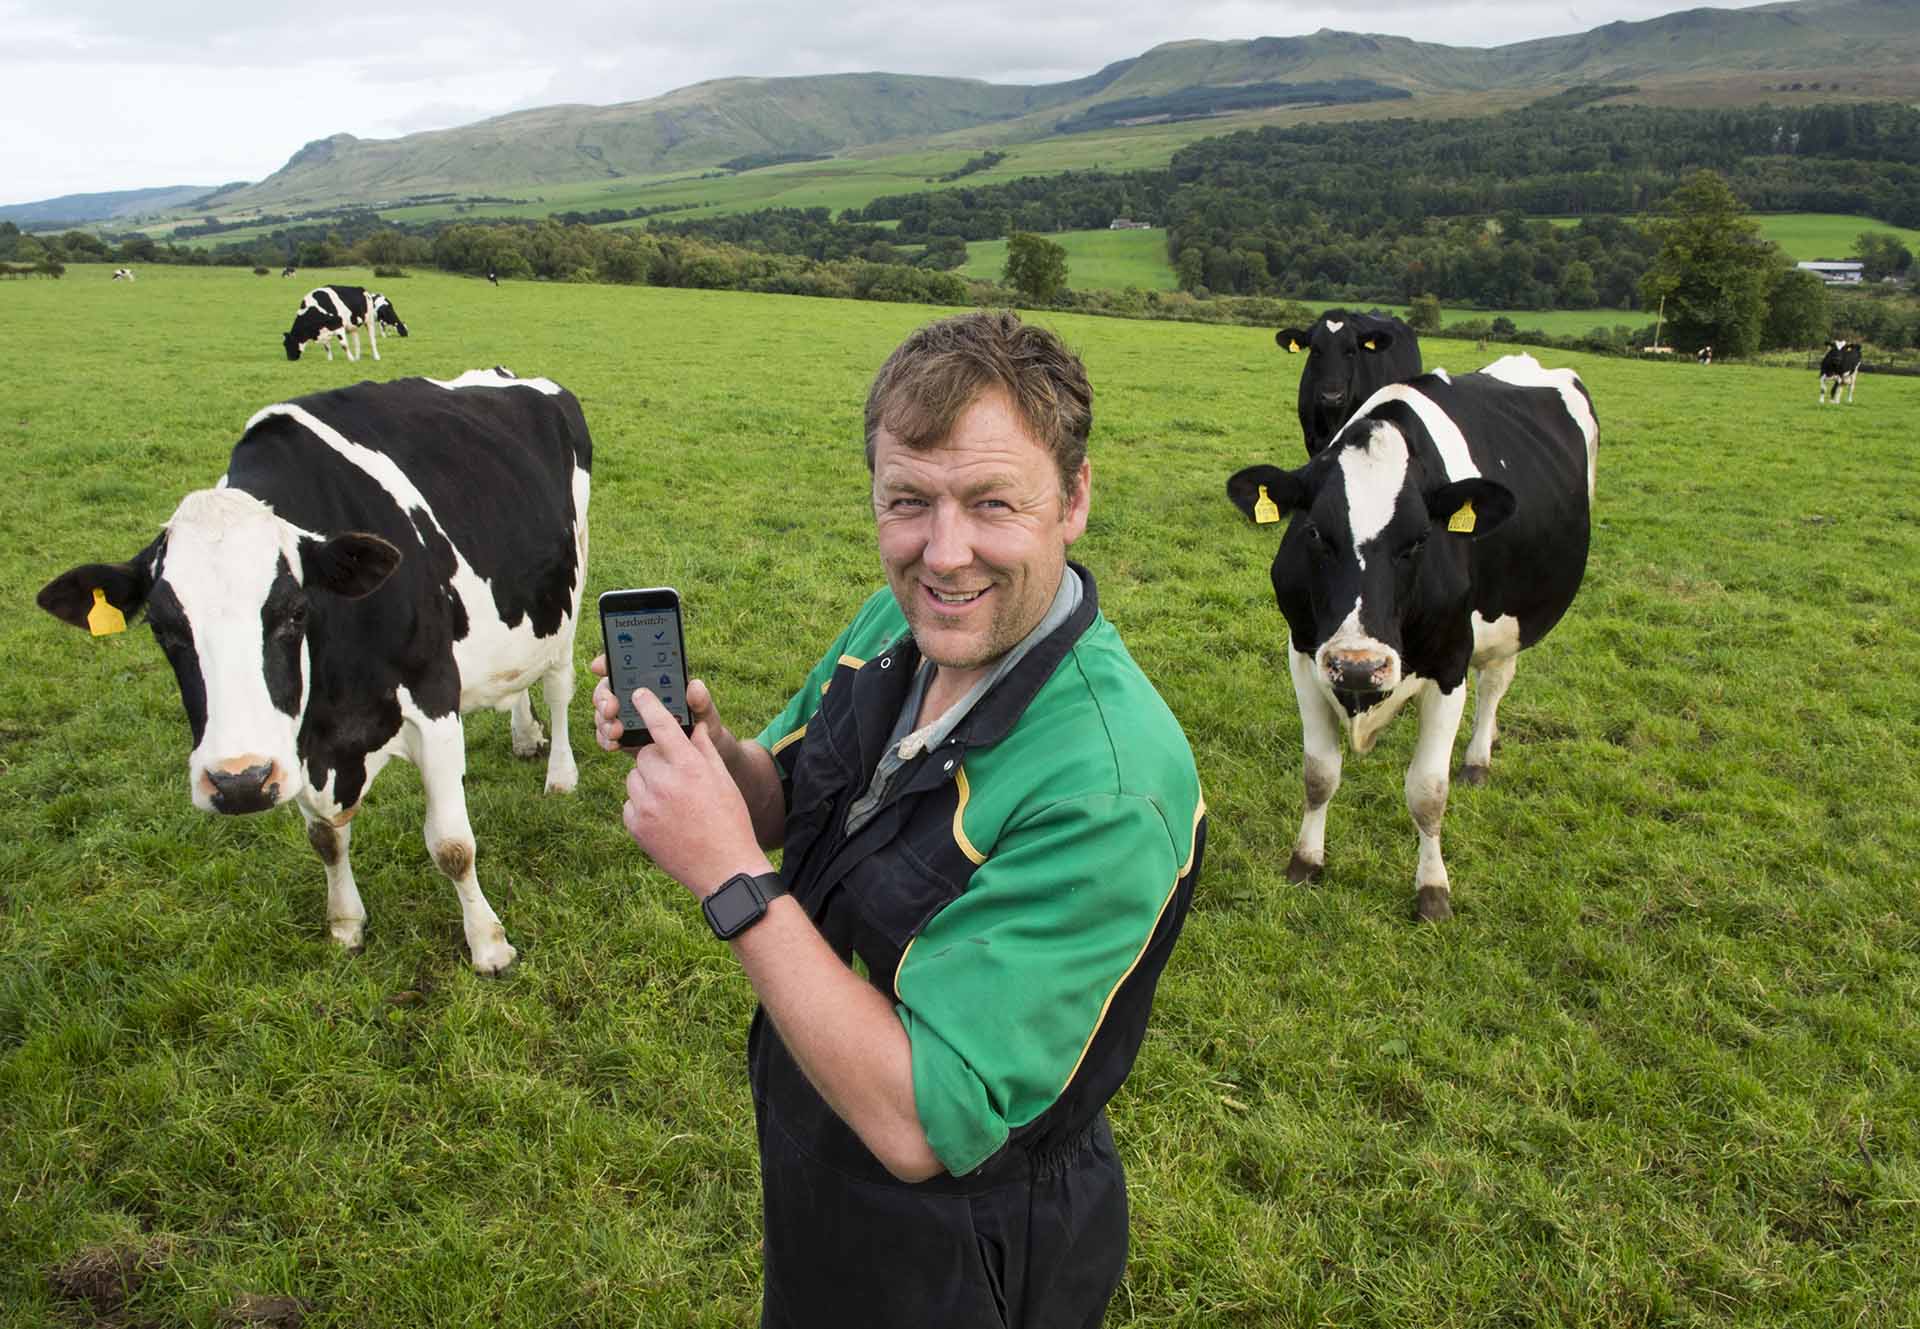 Andrew Paterson dairy farmer using Herdwatch app in field with cows